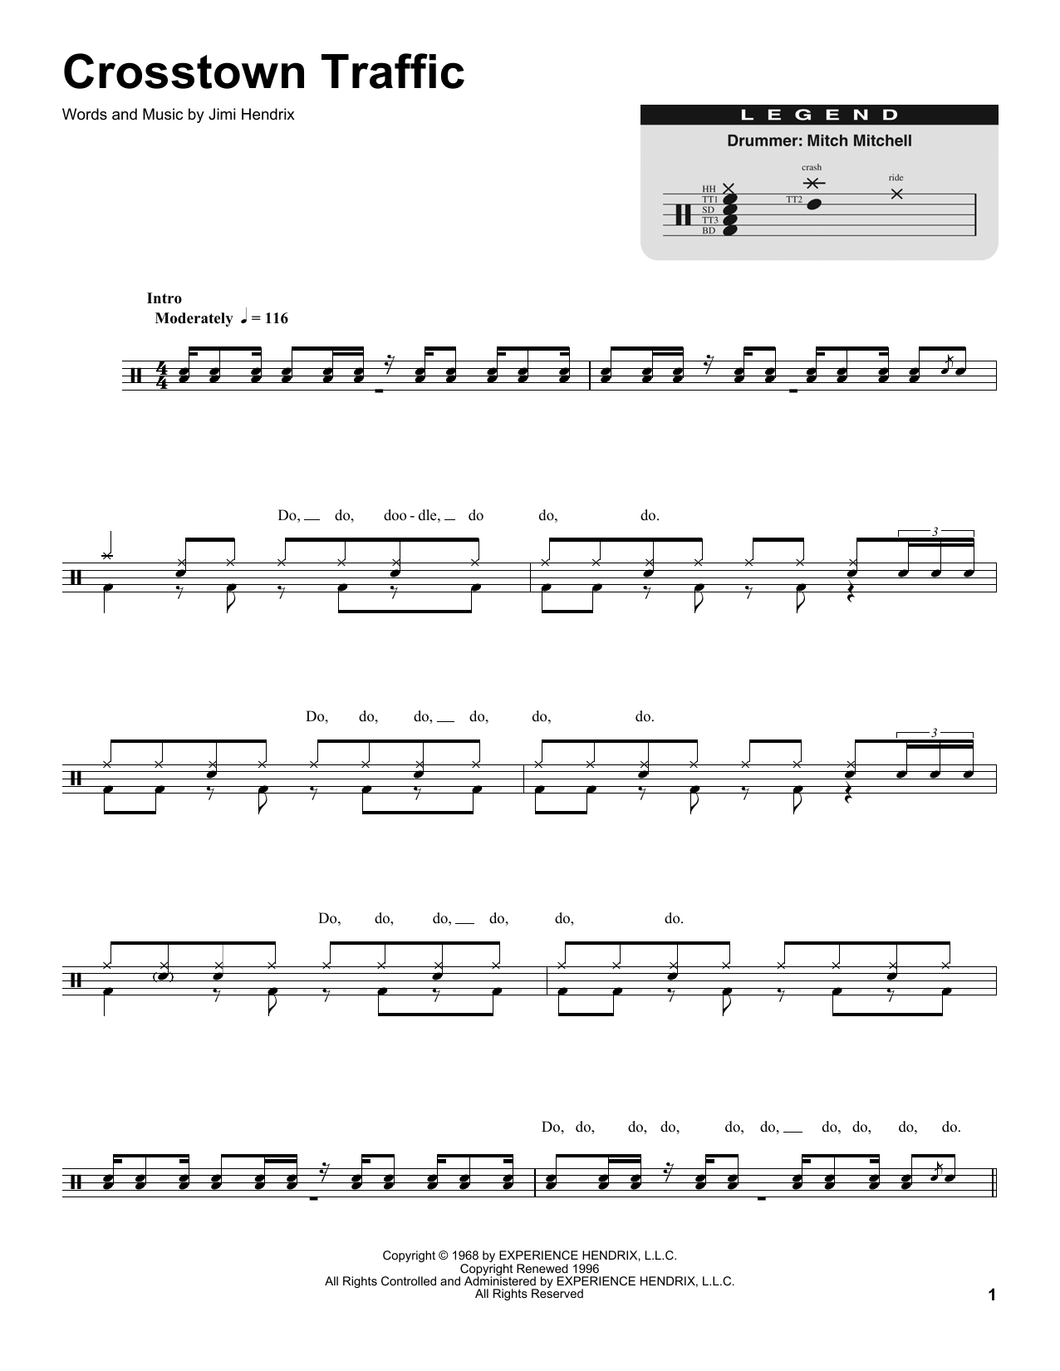 Crosstown Traffic - The Jimi Hendrix Experience - Full Drum Transcription / Drum Sheet Music - SheetMusicDirect DT